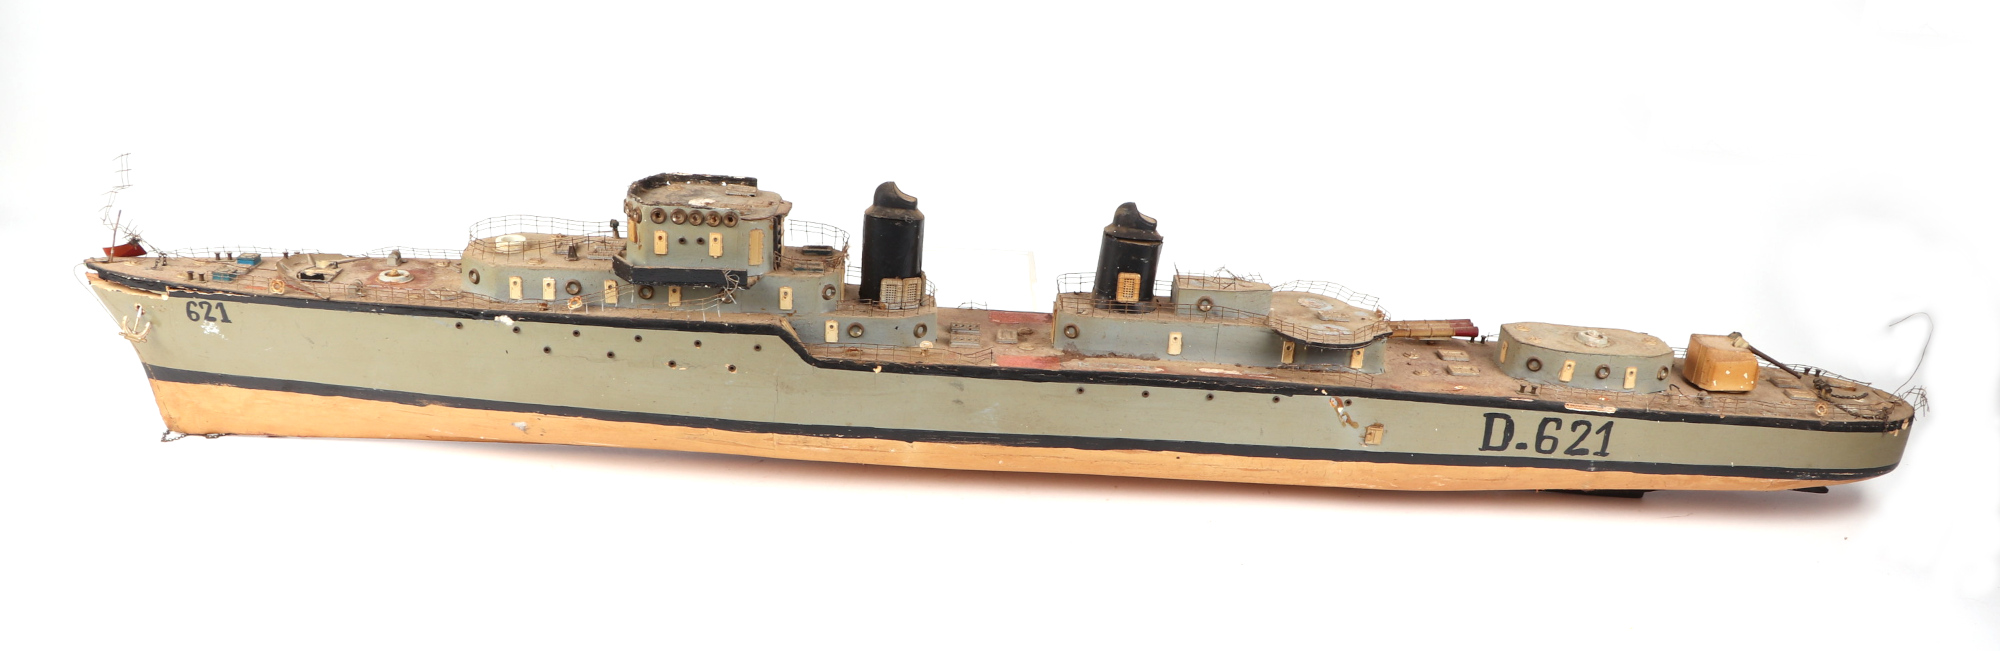 A scratch built model of a warship with painted wooden hull, approx 125cm long; together with - Image 7 of 13